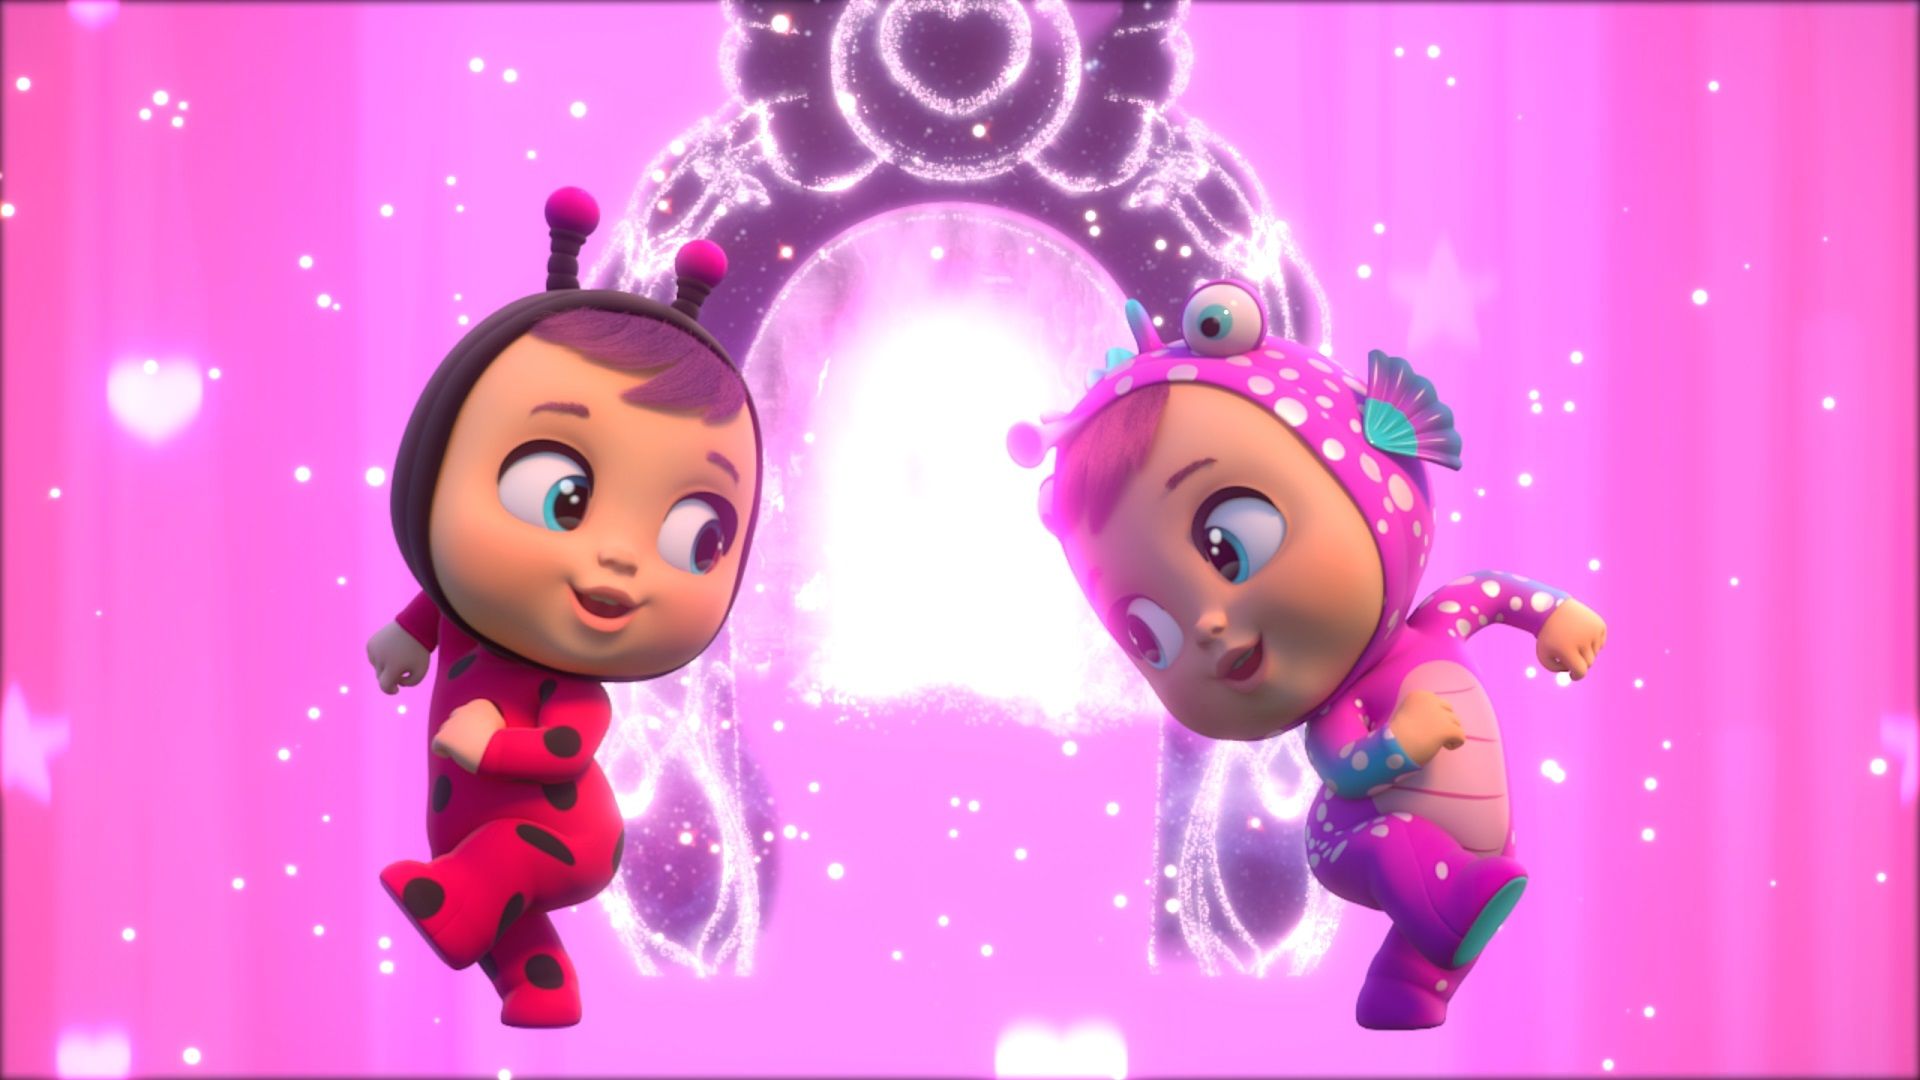 IMC Toys strikes new partnership with Nickelodeon for Cry Babies Magic Tears